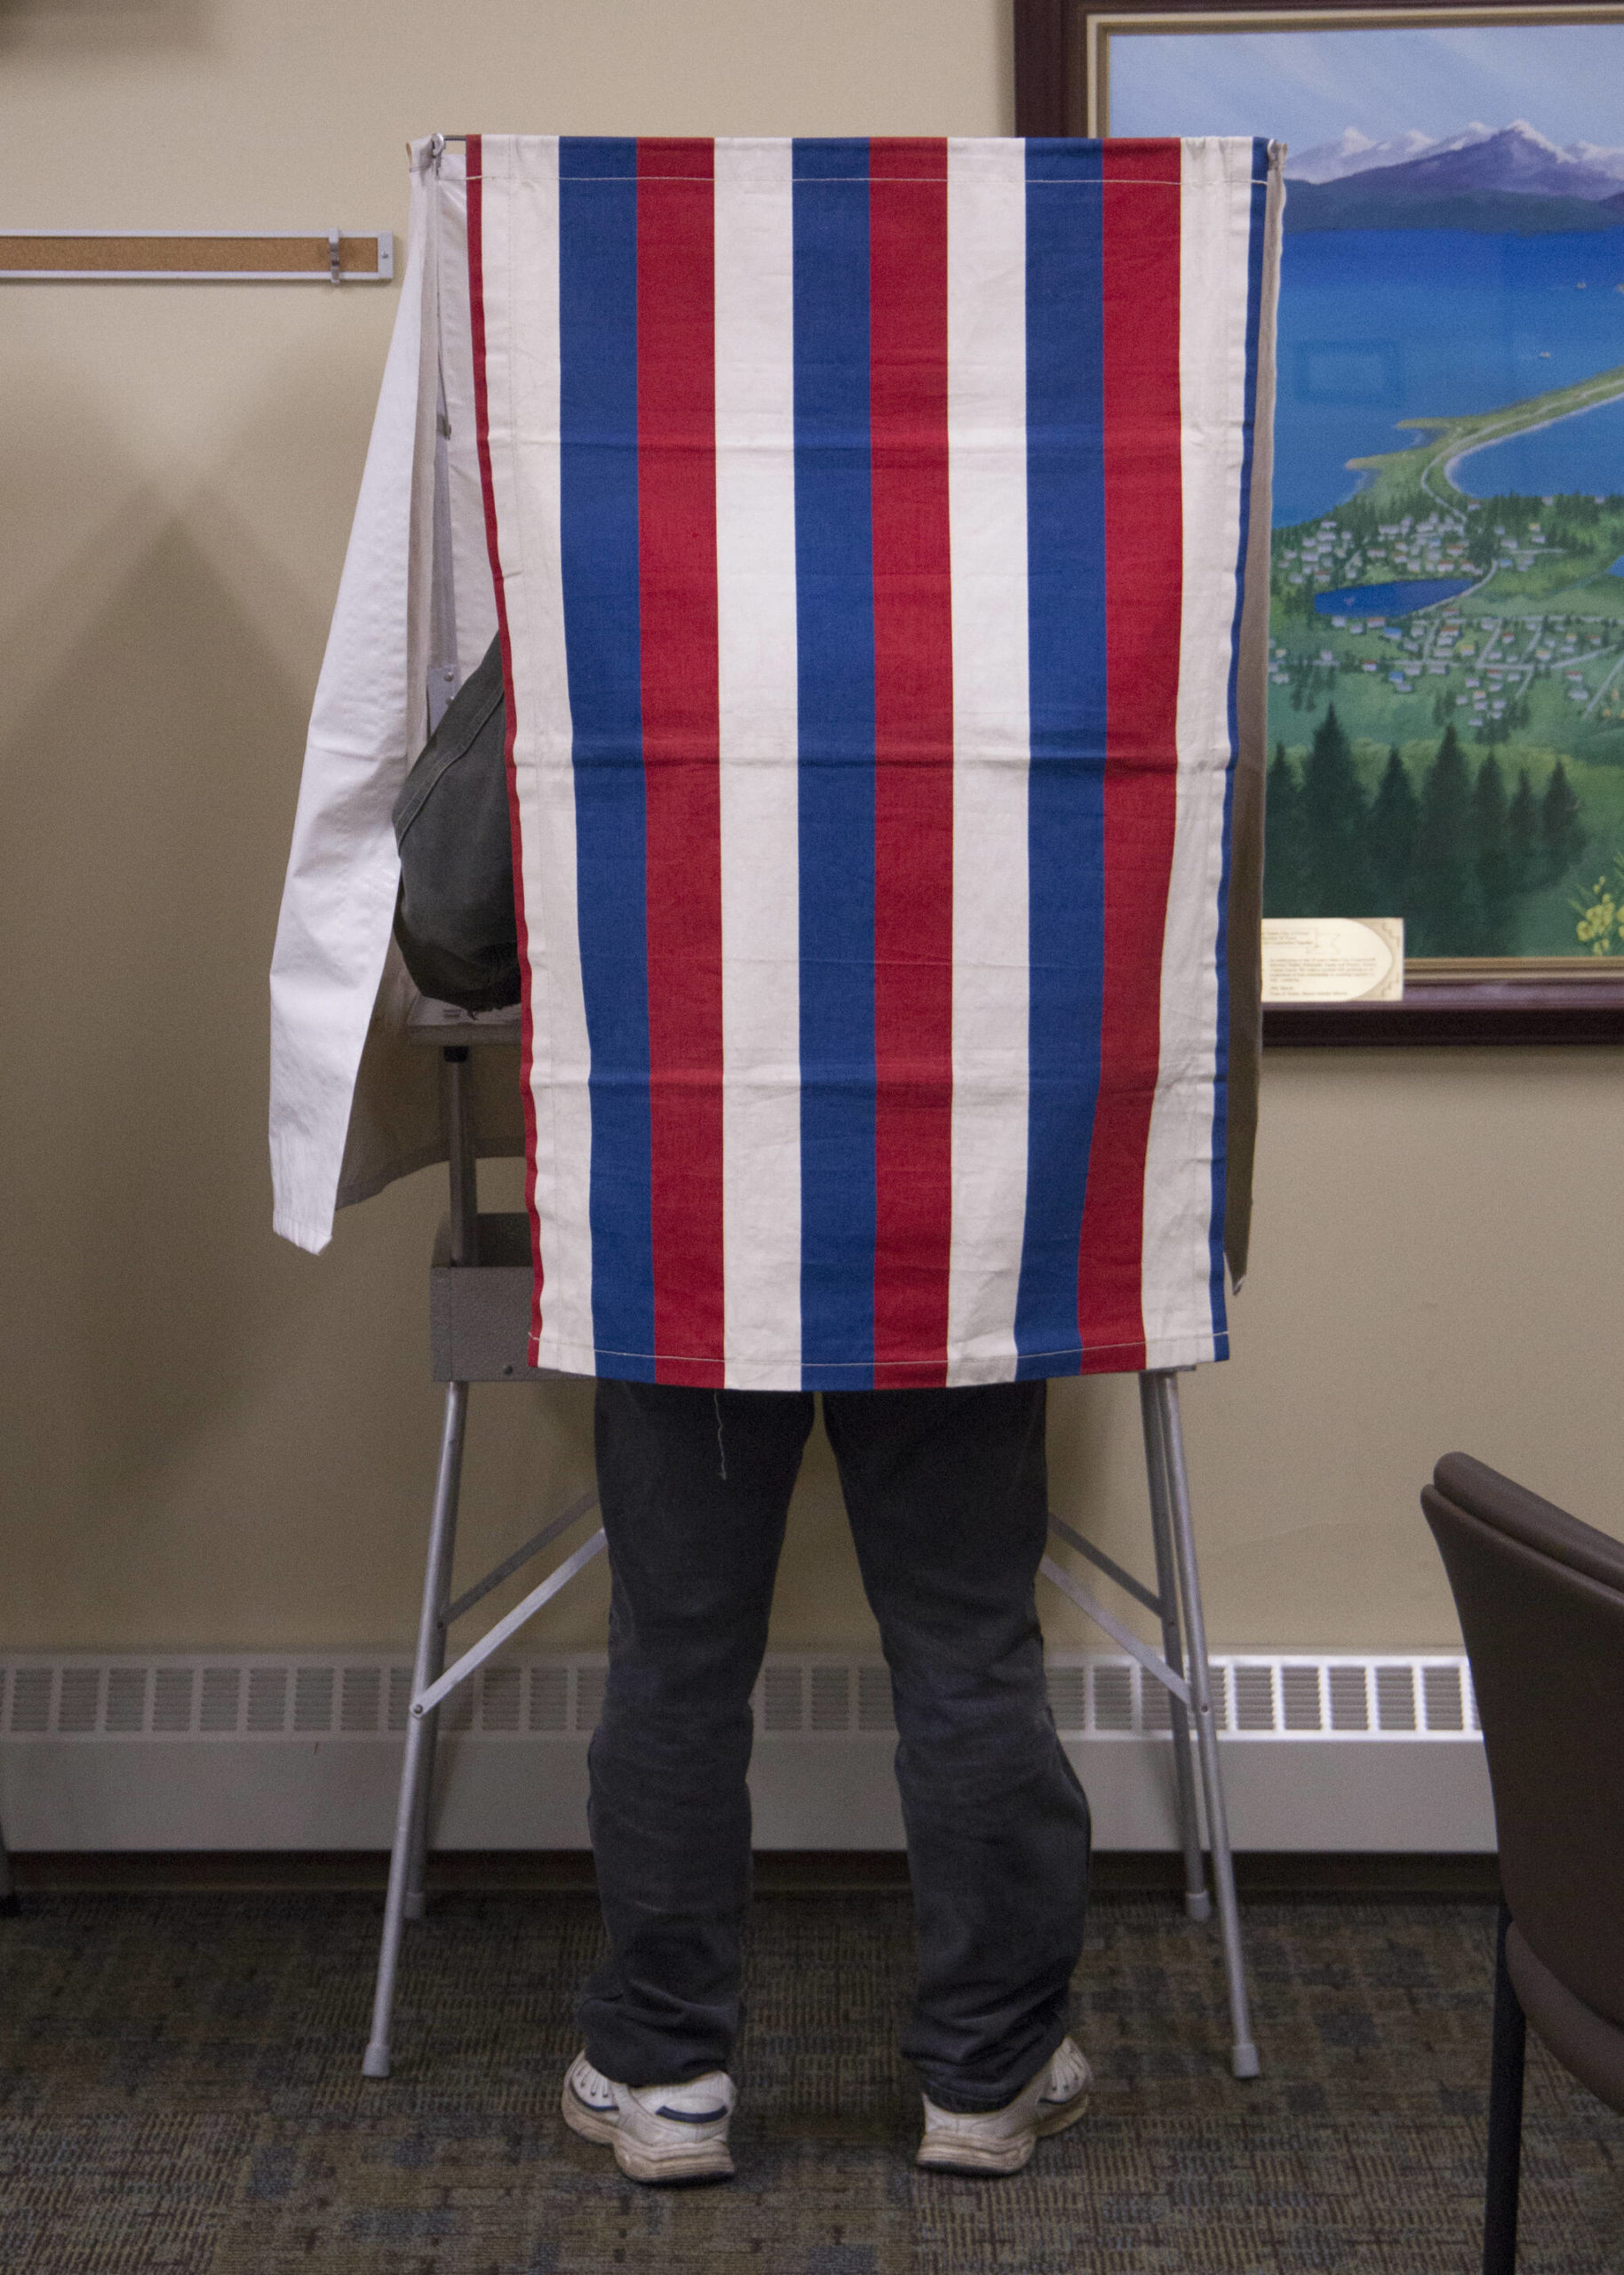 A voter uses the privacy curtain to cast his ballot at the Homer City Hall on Oct. 5. (Photo by Sarah Knapp/Homer News)